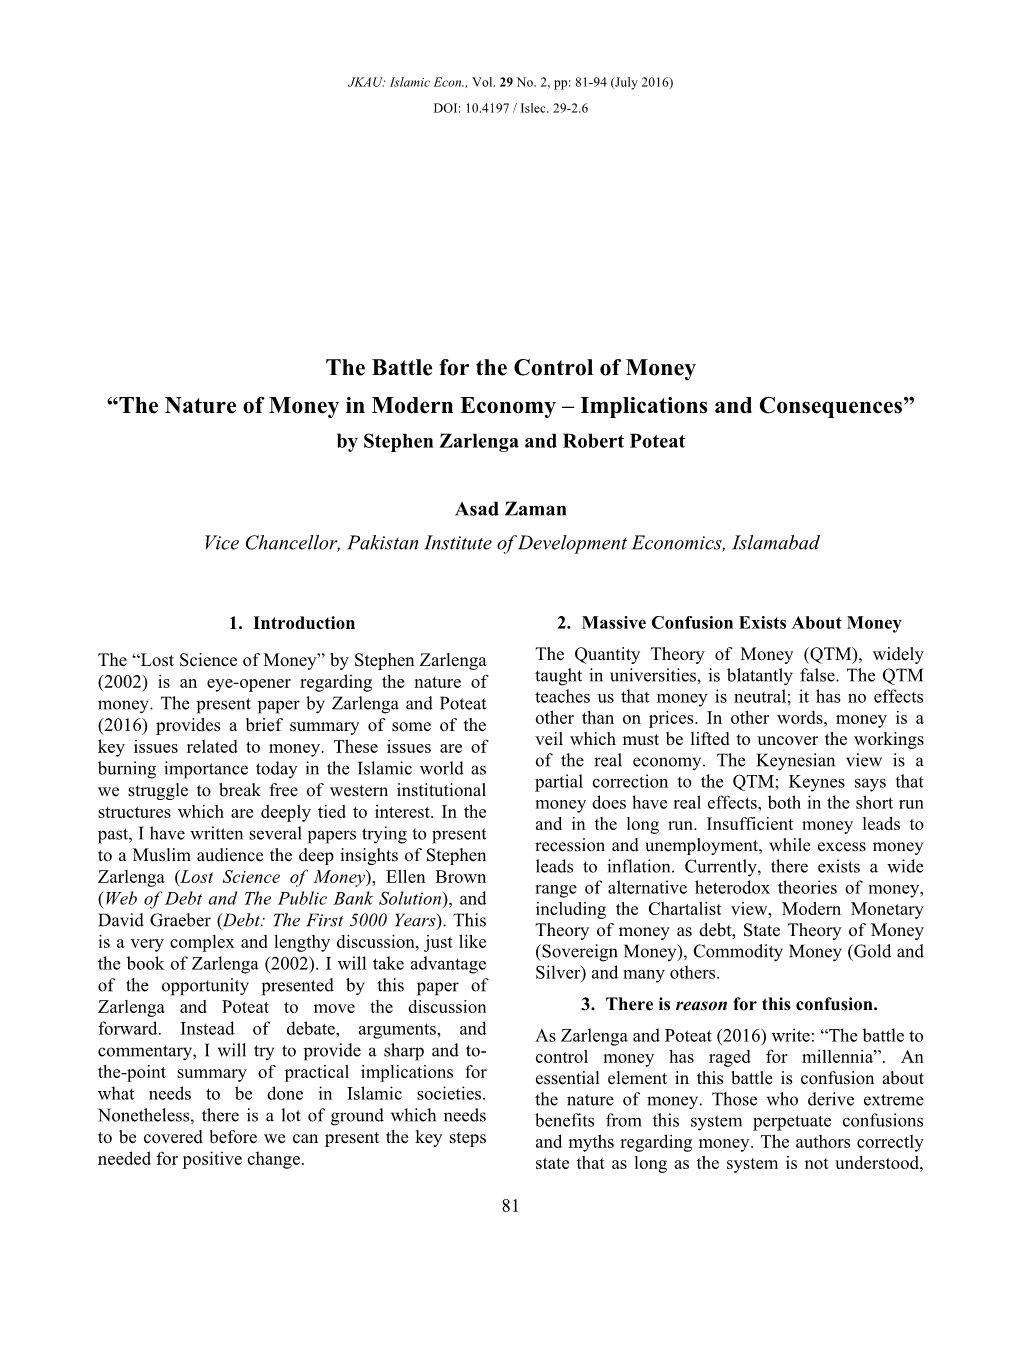 The Nature of Money in Modern Economy – Implications and Consequences” by Stephen Zarlenga and Robert Poteat